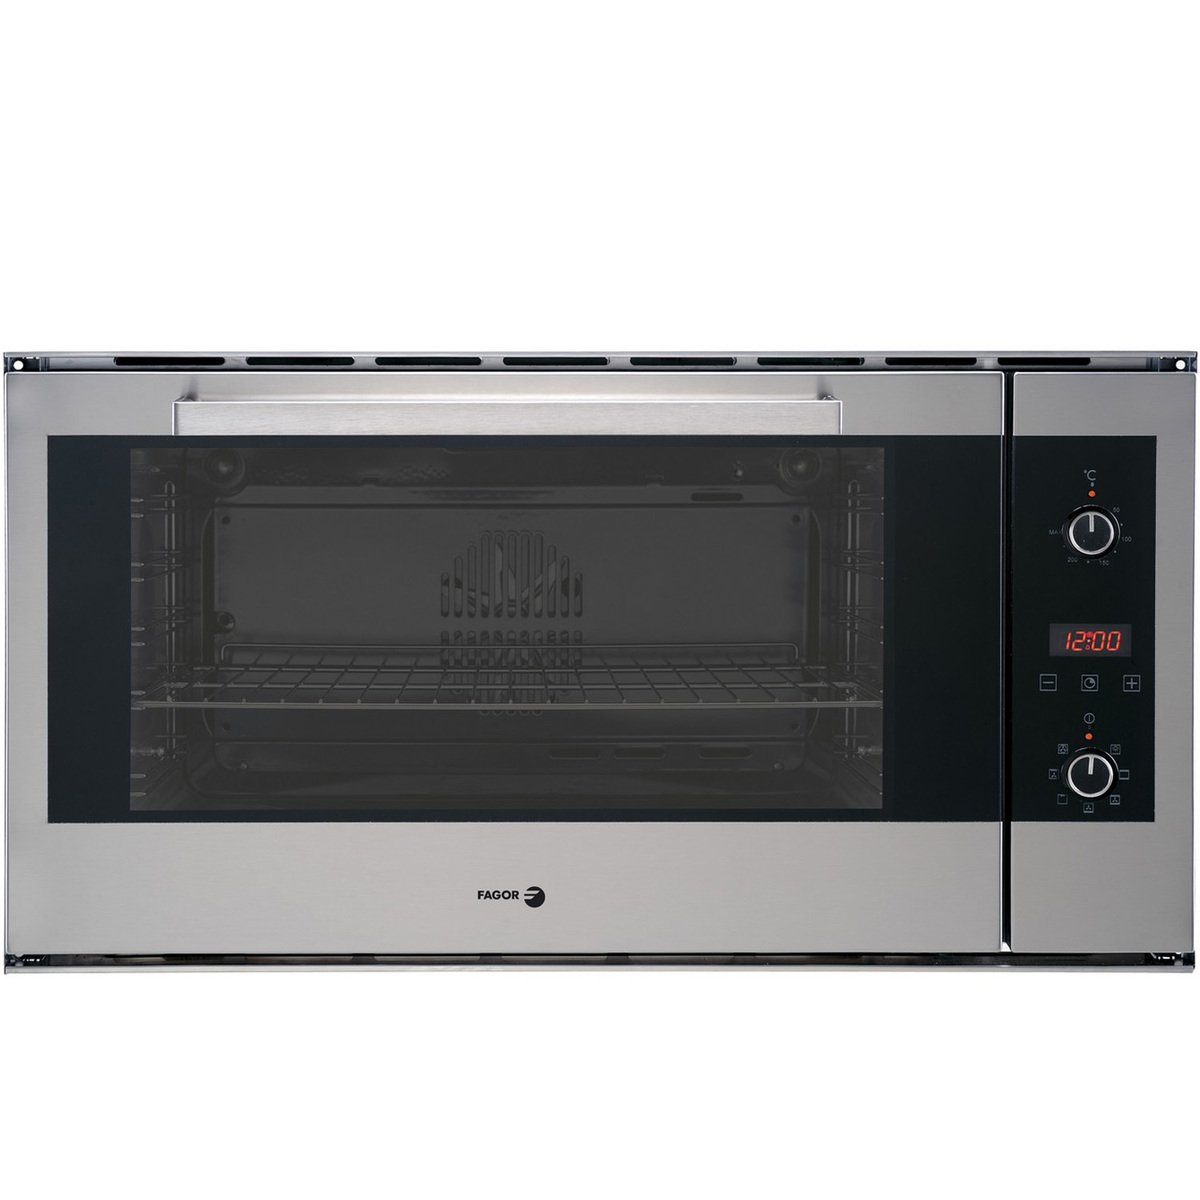 Fagor Built-In Electric Oven 6H936BX 72Ltr